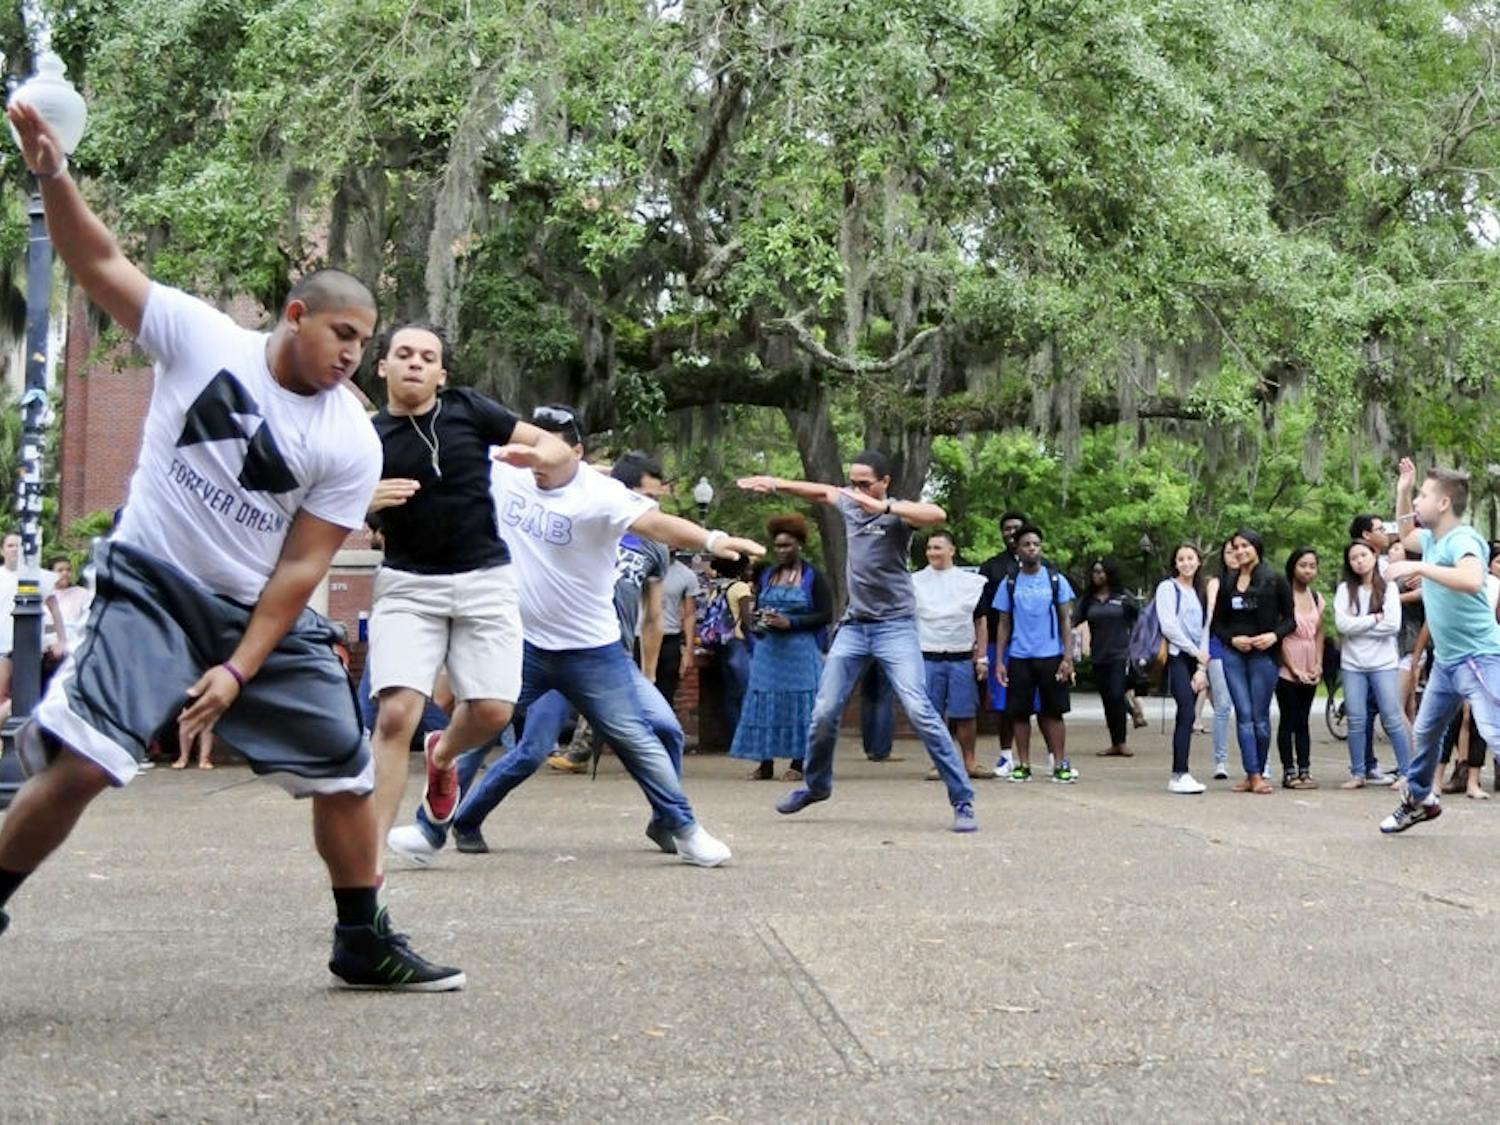 Carlos Soria (left), a 21-year-old anthropology student, leads members of Sigma Lambda Beta through a step routine during a Fourth Friday showcase in Turlington Plaza on Friday.